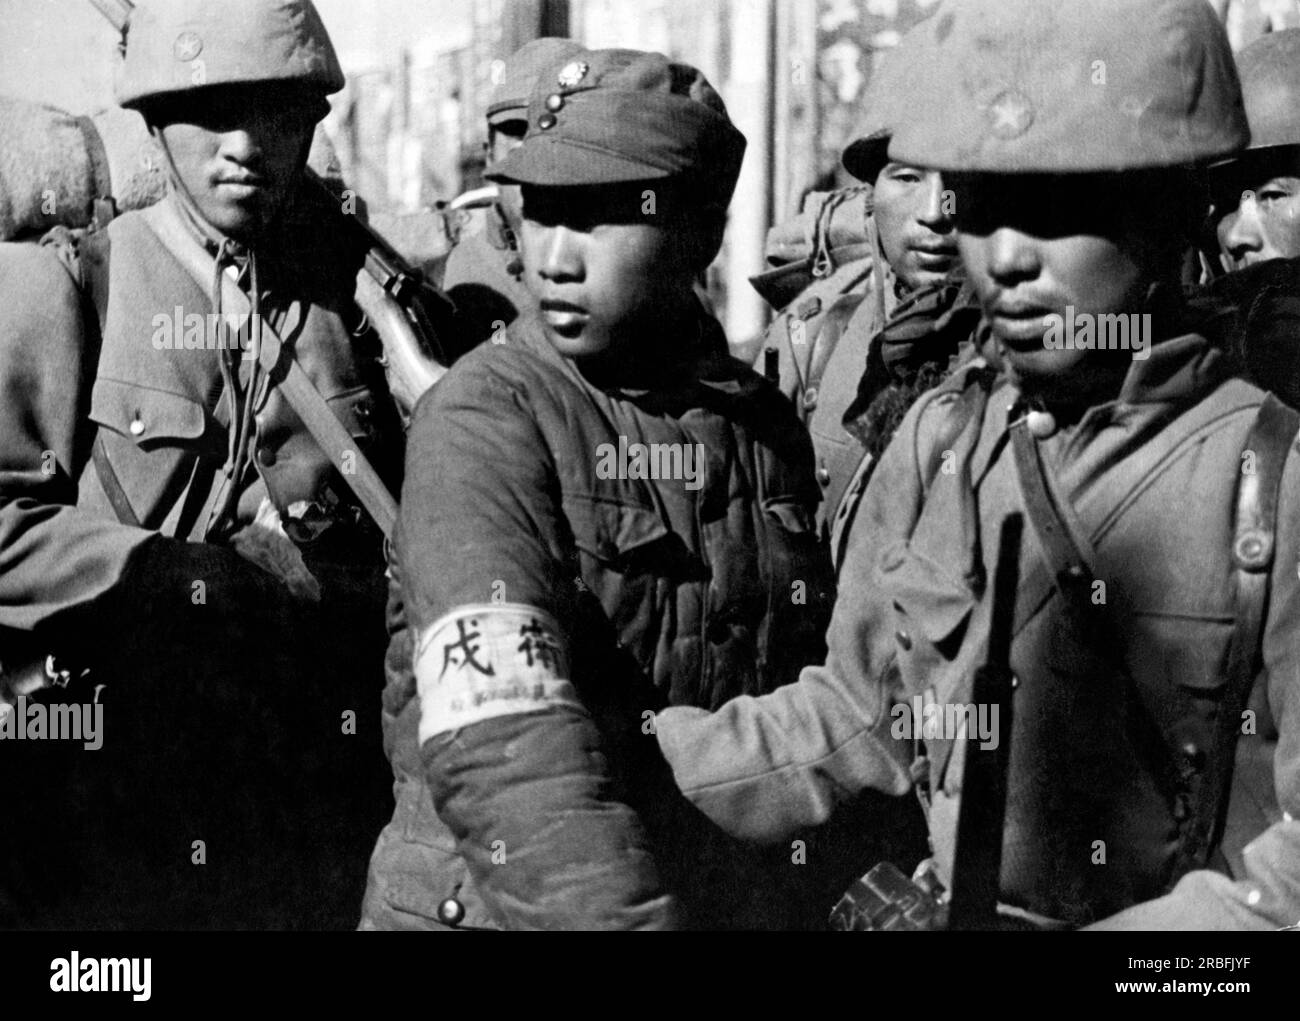 Nanking, China:  December, 1937. An official Japanese picture of a captured Chinese soldier at Nanking. With or without uniforms, thousands of Chinese soldiers at Nanking were brutally executed. Stock Photo